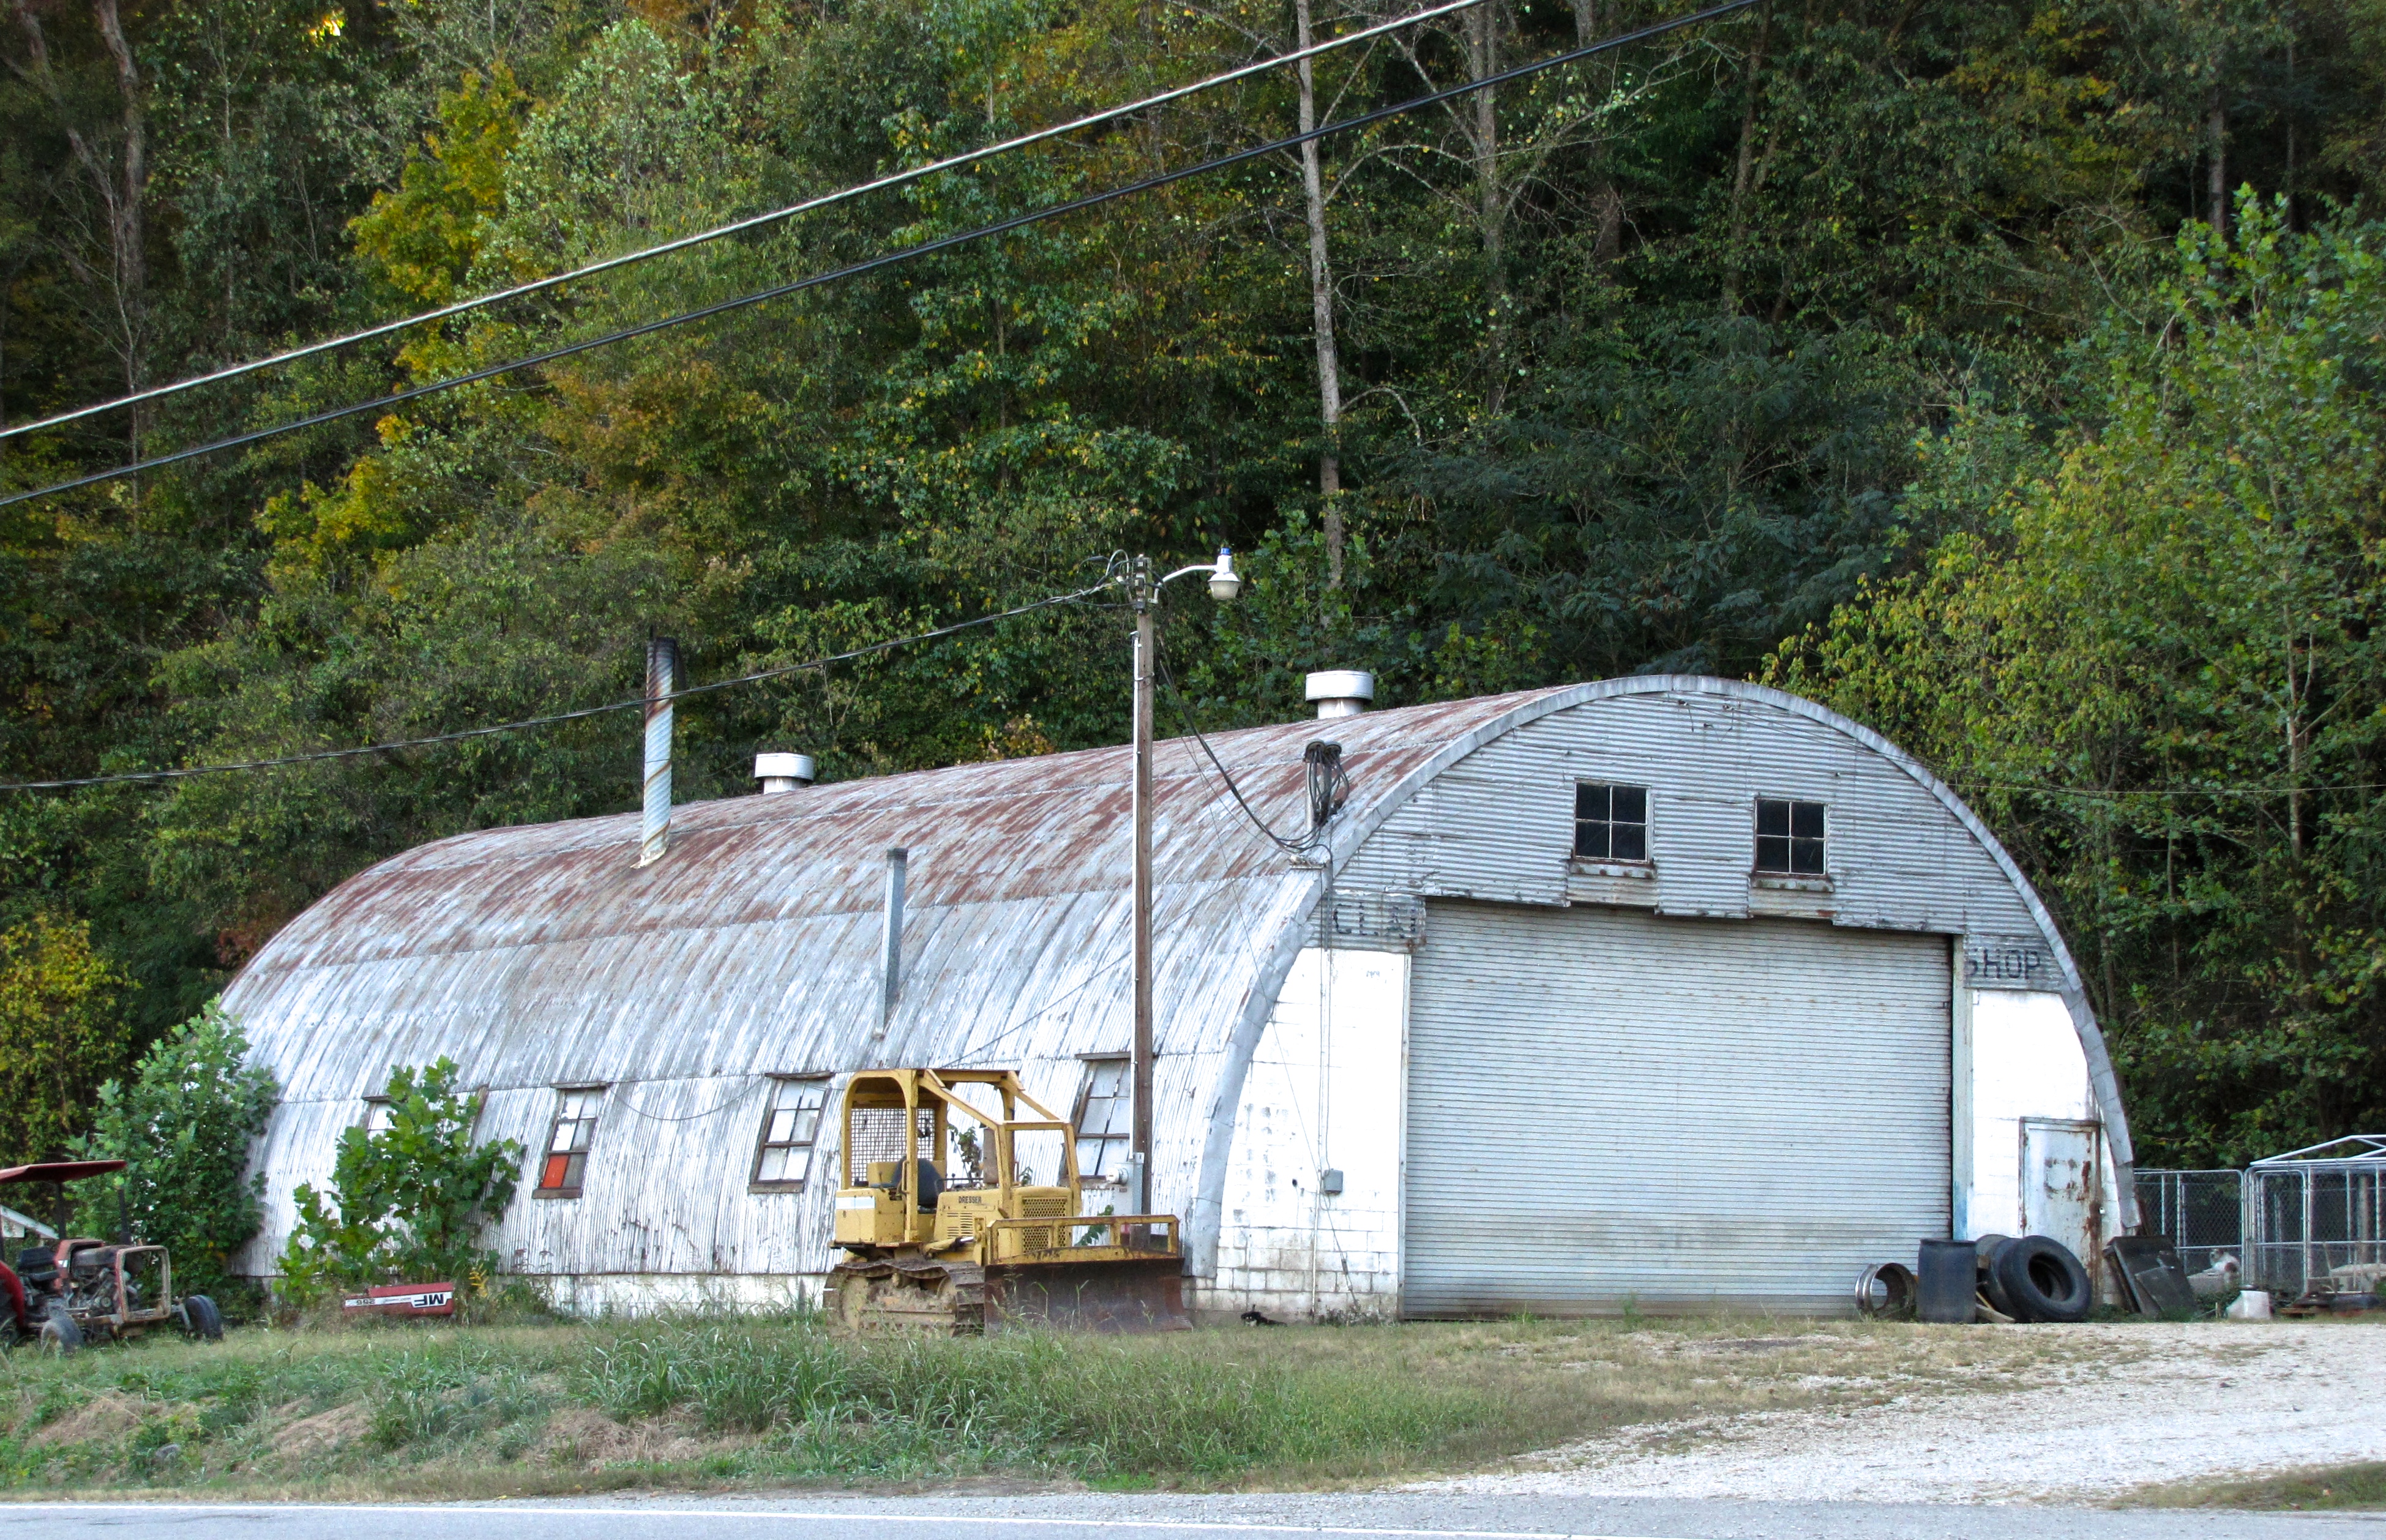 quonset hut in Marion, AR